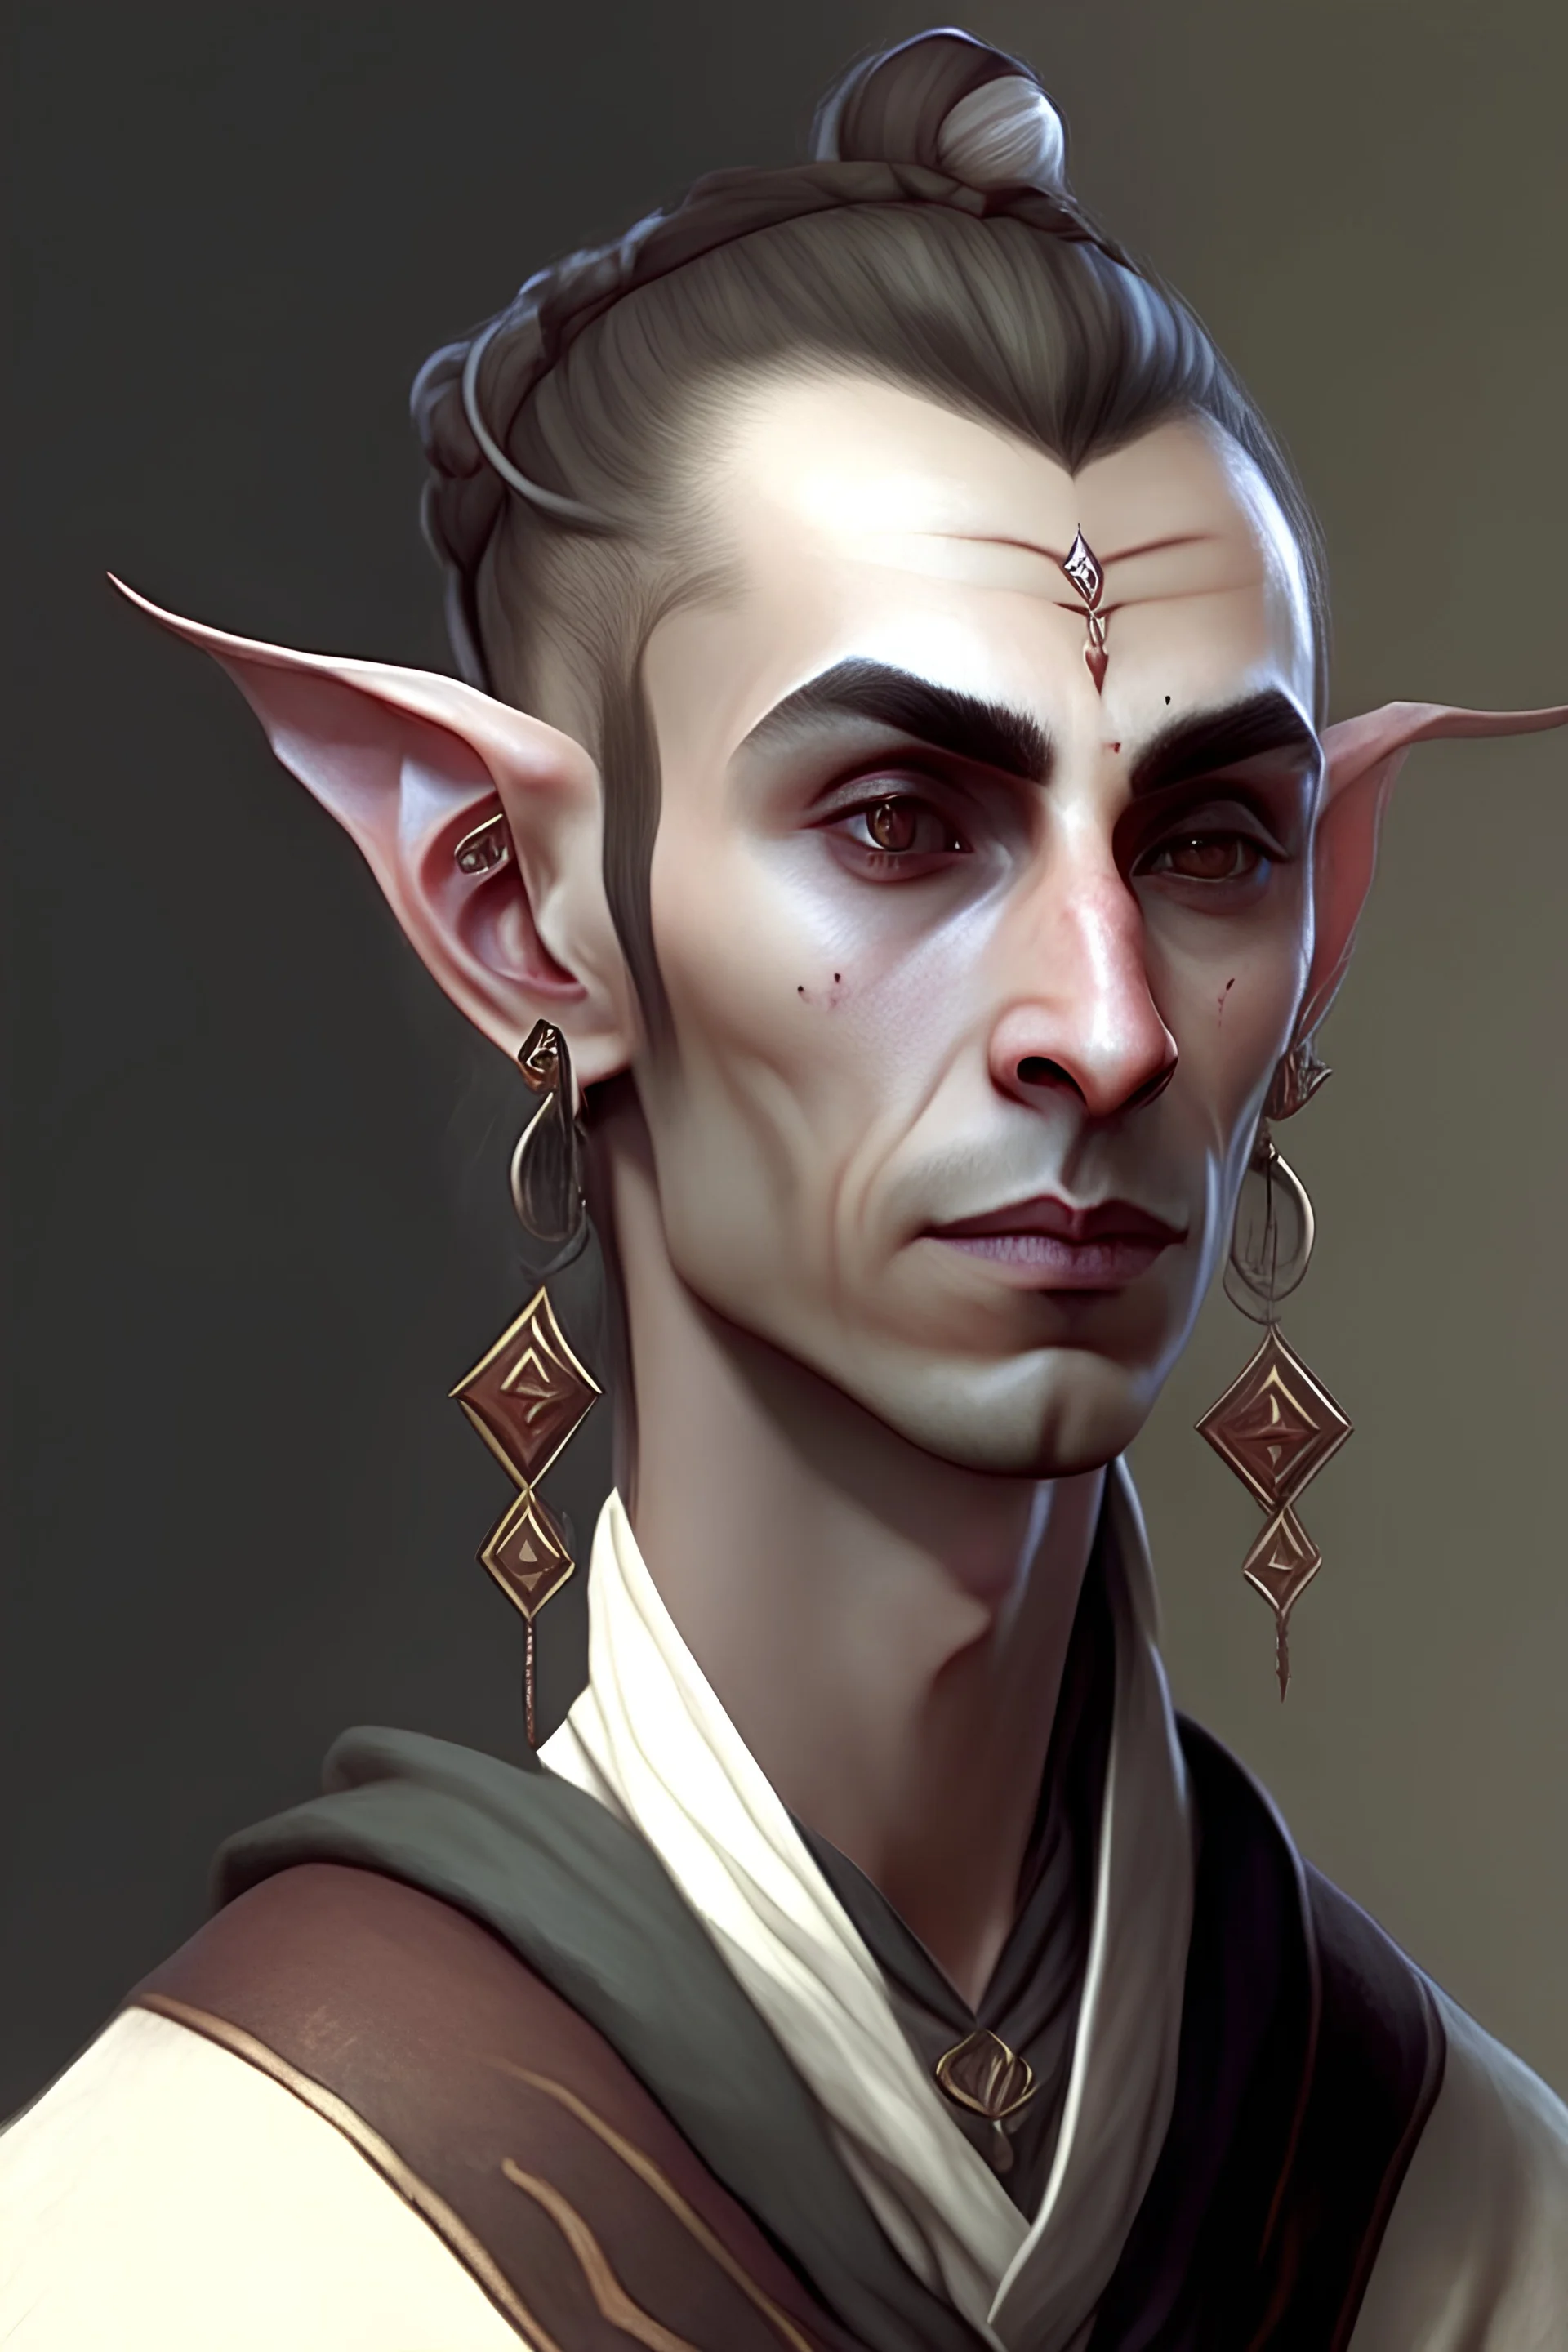 Half elf in spellguard robes with a long top knot and he has earrings and eyebrow rings